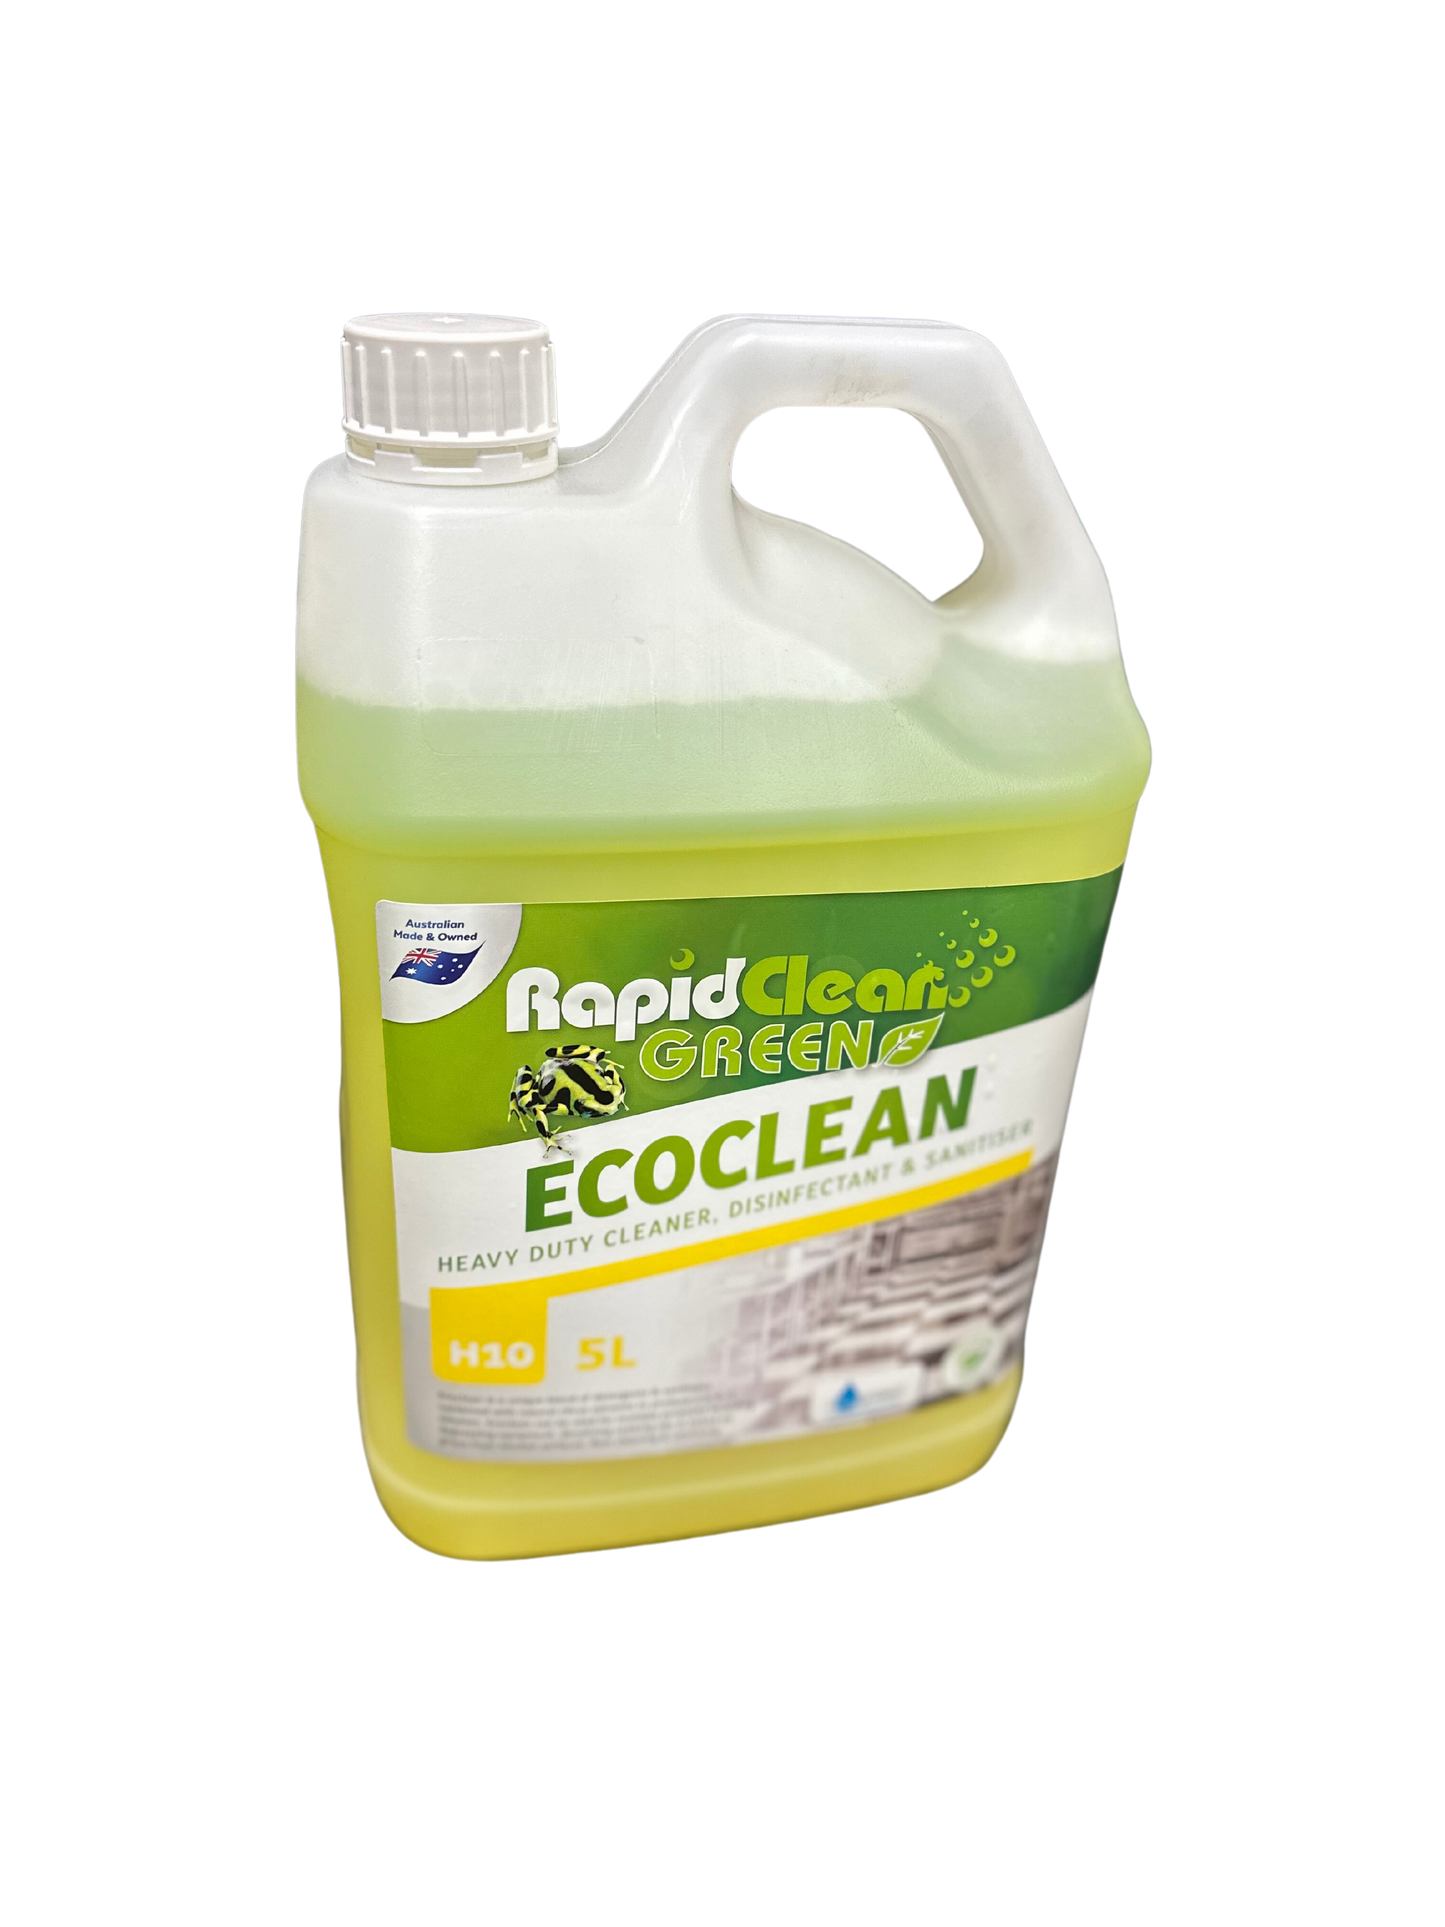 Heavy Duty Cleaner - Ecoclean